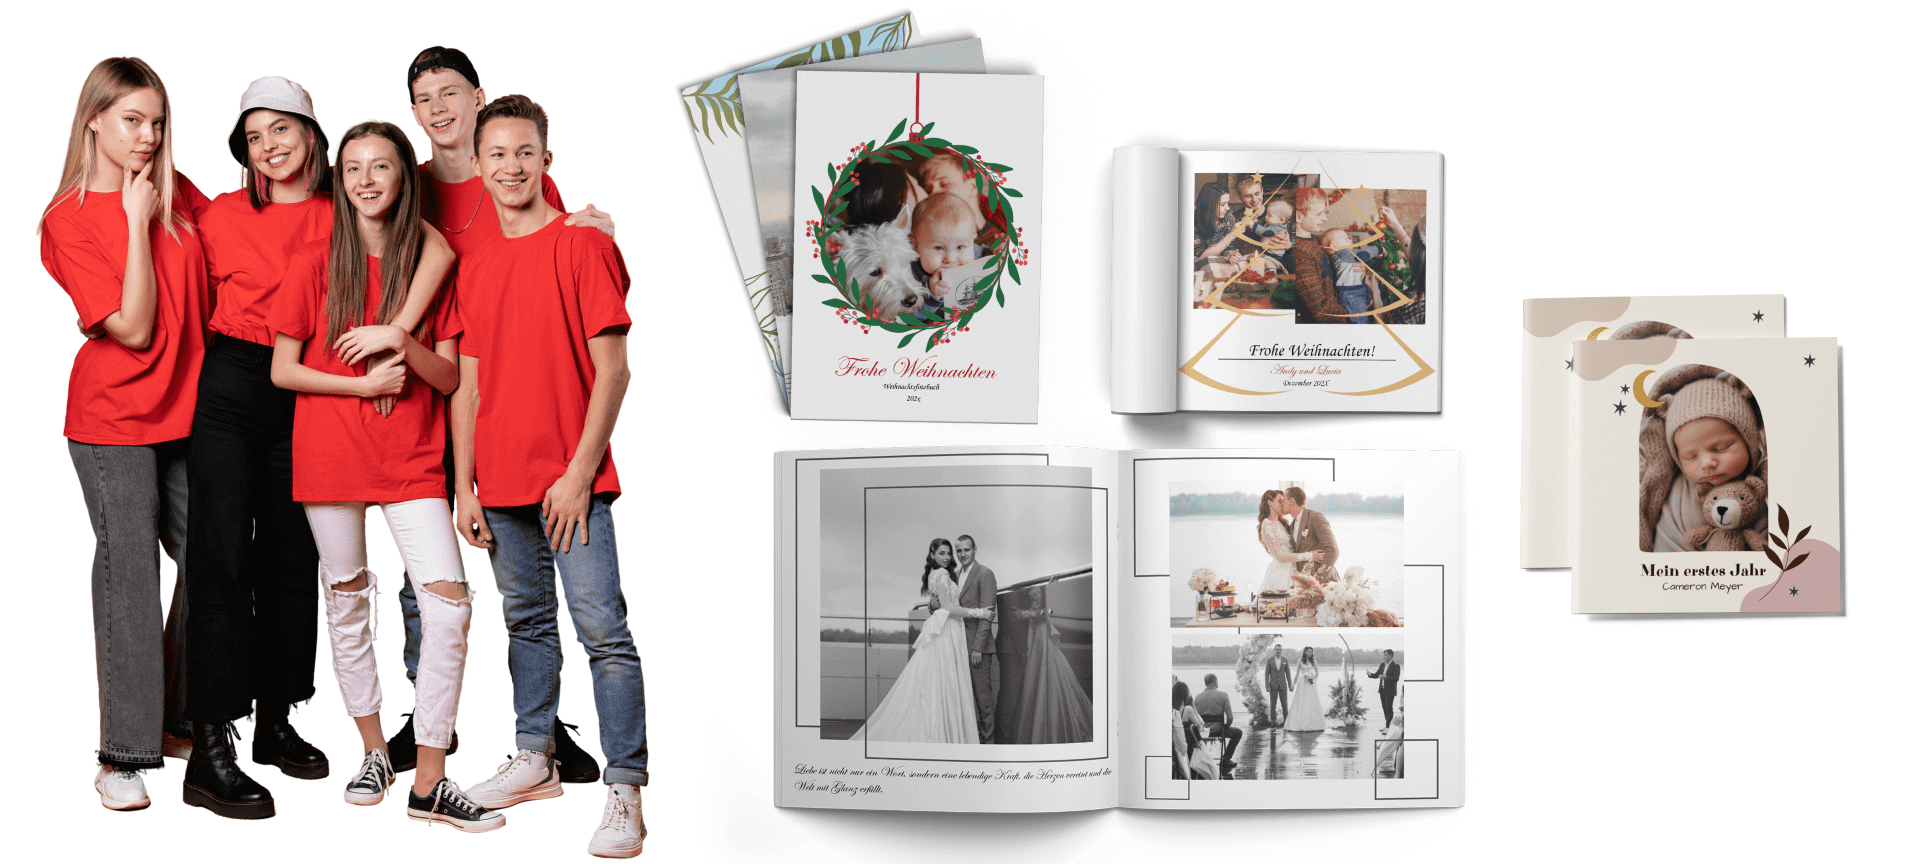 Create your own photo book online with templates